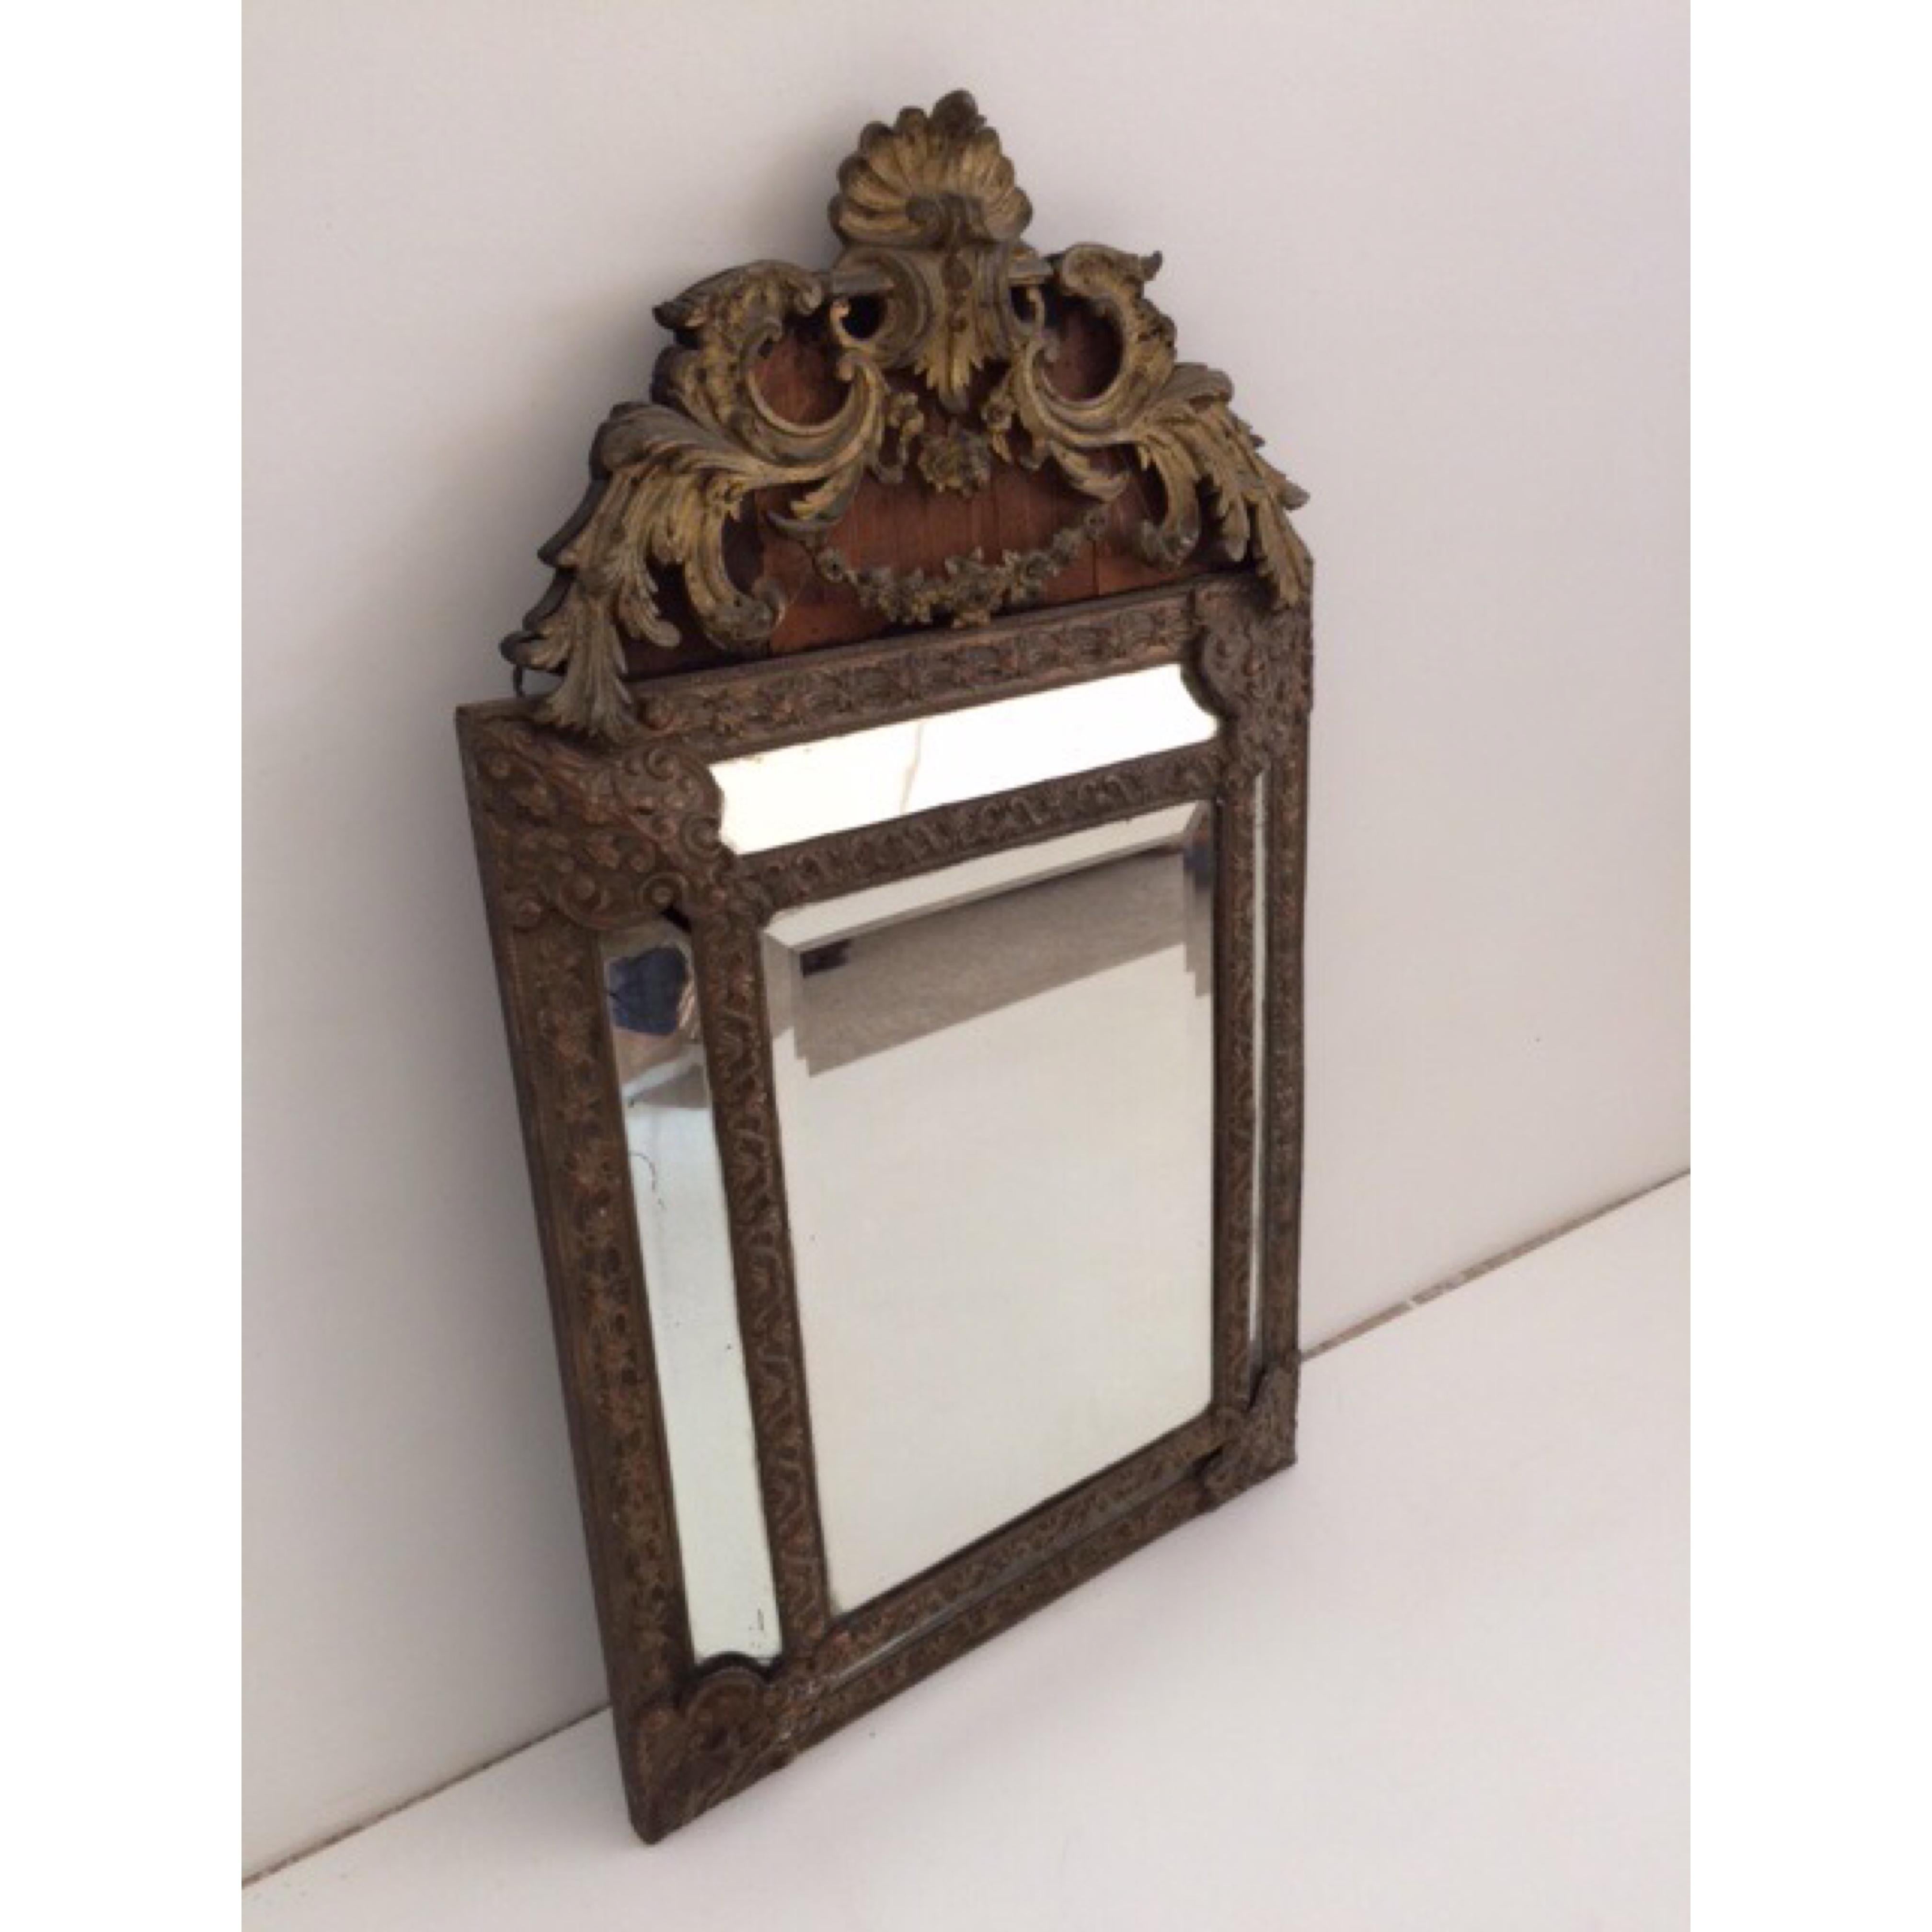 Continental European mirror with gilt bronze top and additional gold leaf around mirror. Wood back.